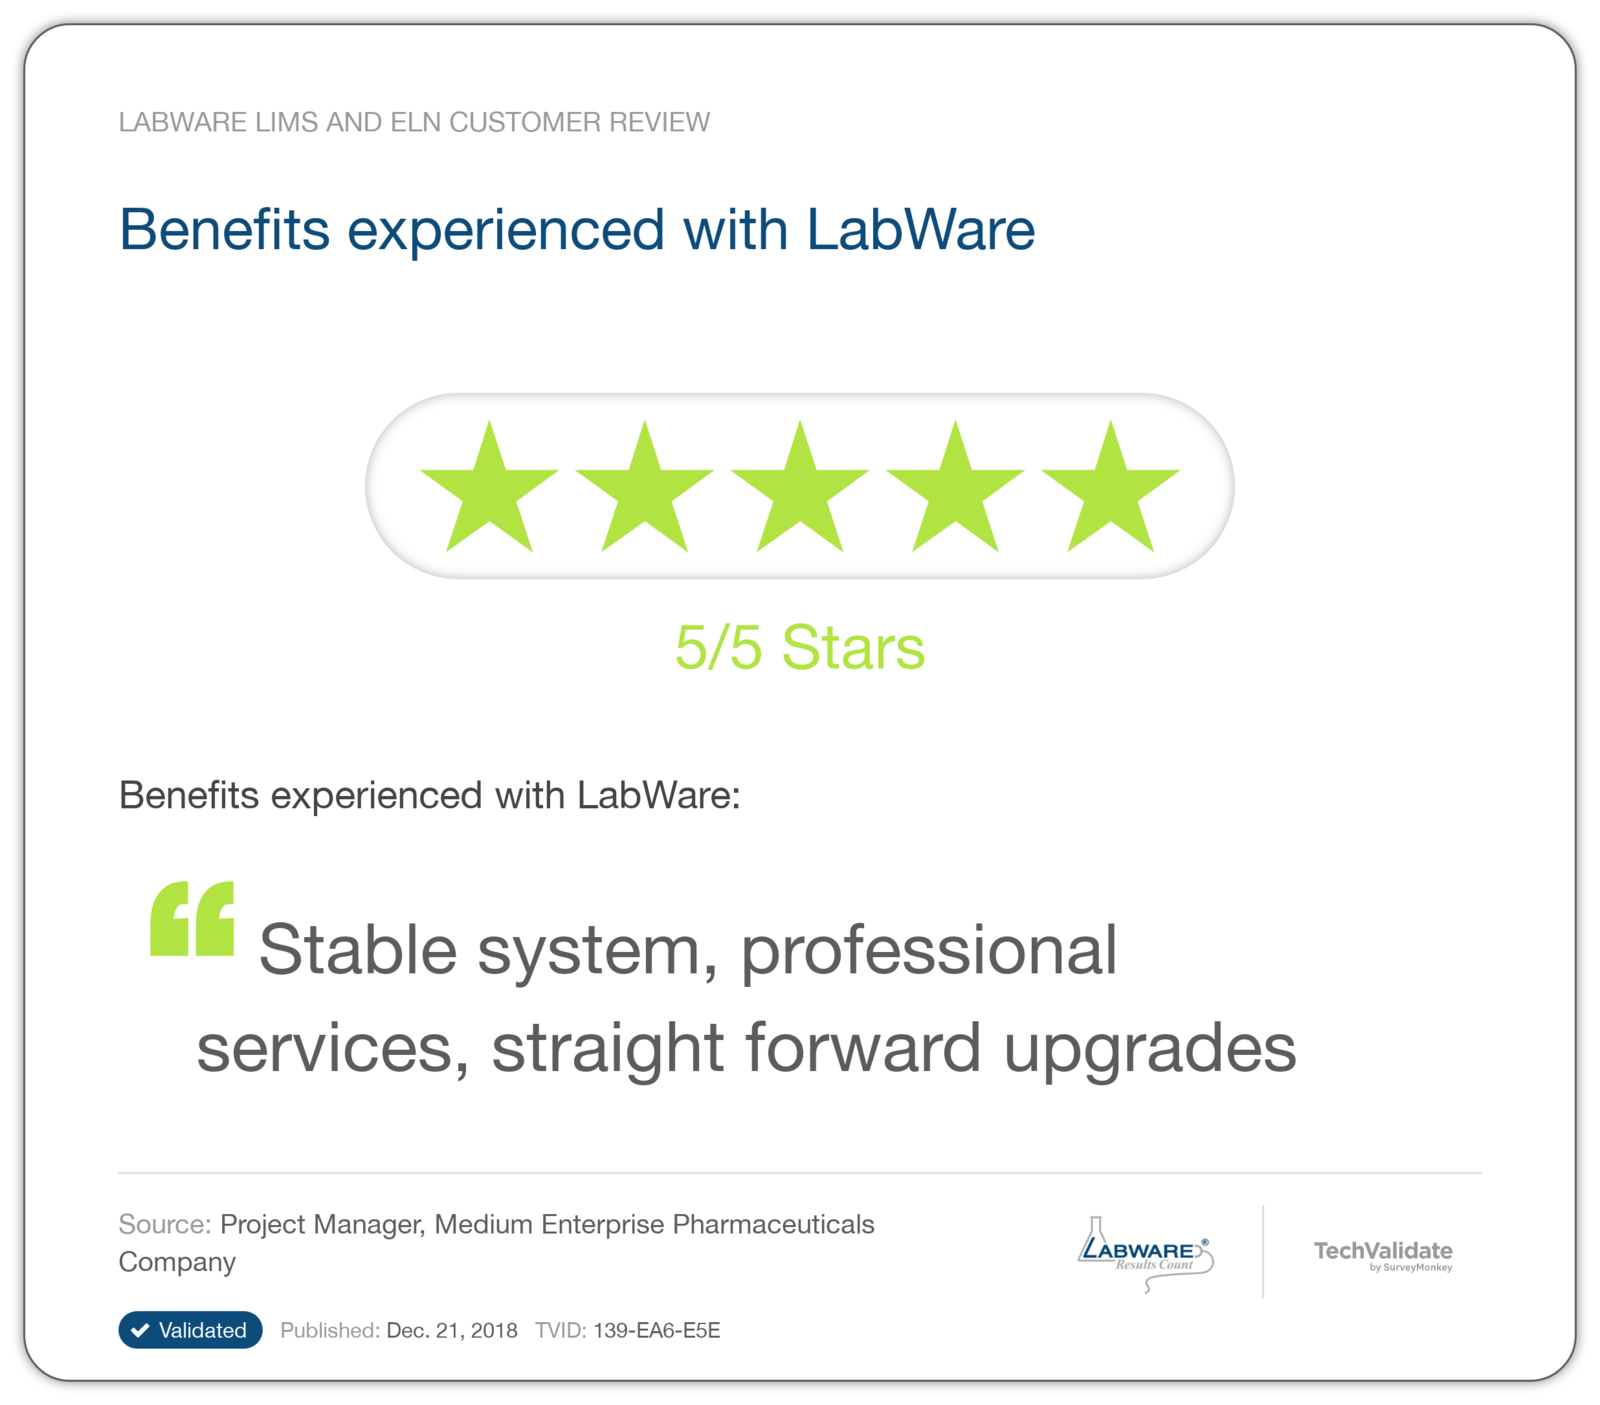 Benefits experienced with LabWare